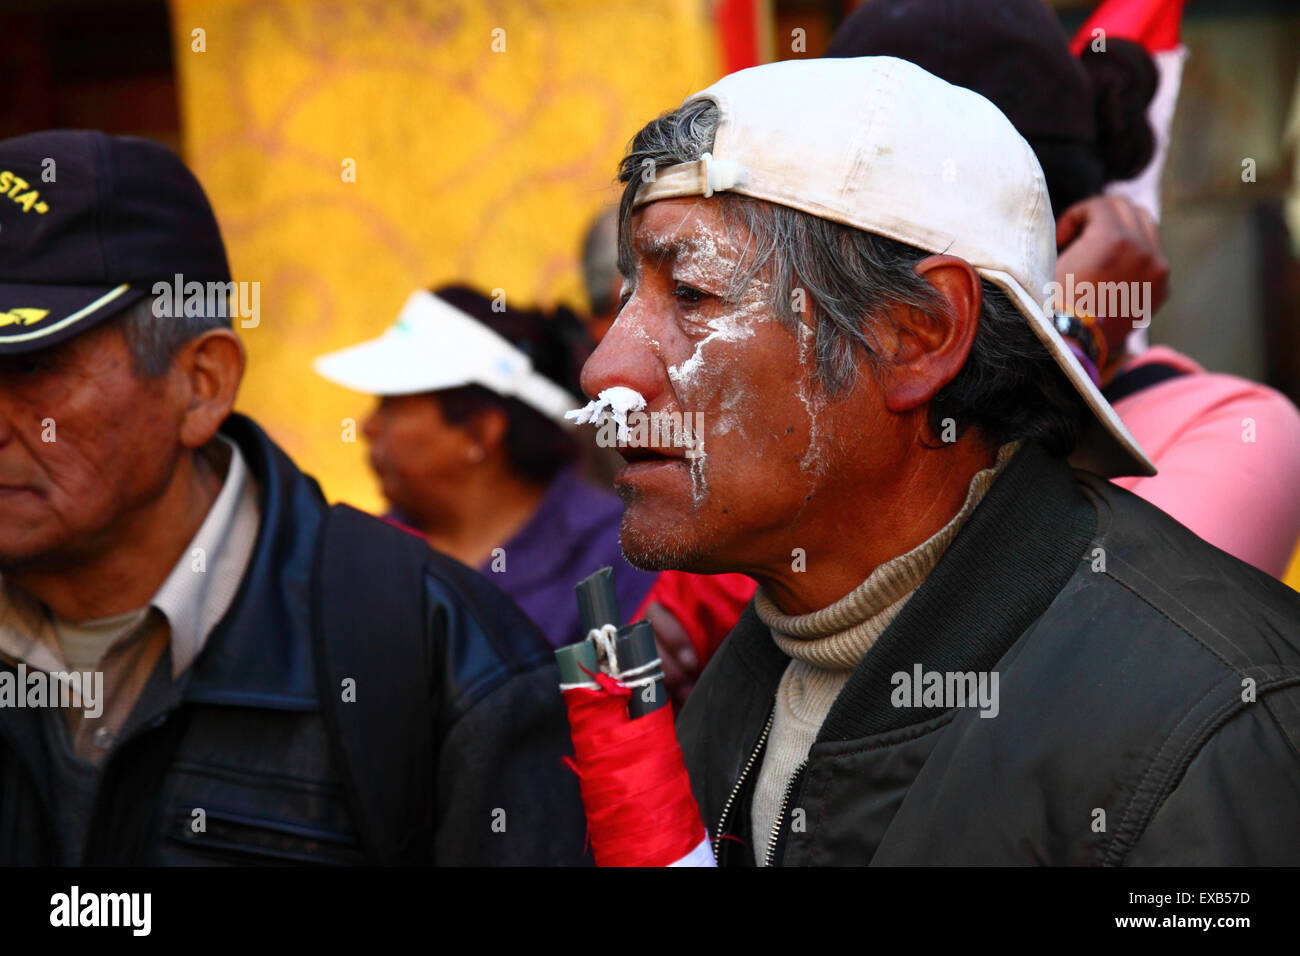 La Paz, Bolivia, 10th July 2015. A protestor from Potosi uses tissue paper in his nostrils to combat the effects of tear gas during a protest by the Potosi Civic Committee and supporters. They are in La Paz to demand the government keeps promises made to the region in the past, which include the construction of a cement factory, hospitals, a hydroelectric plant and an international airport. Police used tear gas to prevent the protesters entering Plaza Murillo (where the Presidential Palace and Congress buildings are) Credit:  James Brunker/Alamy Live News Stock Photo